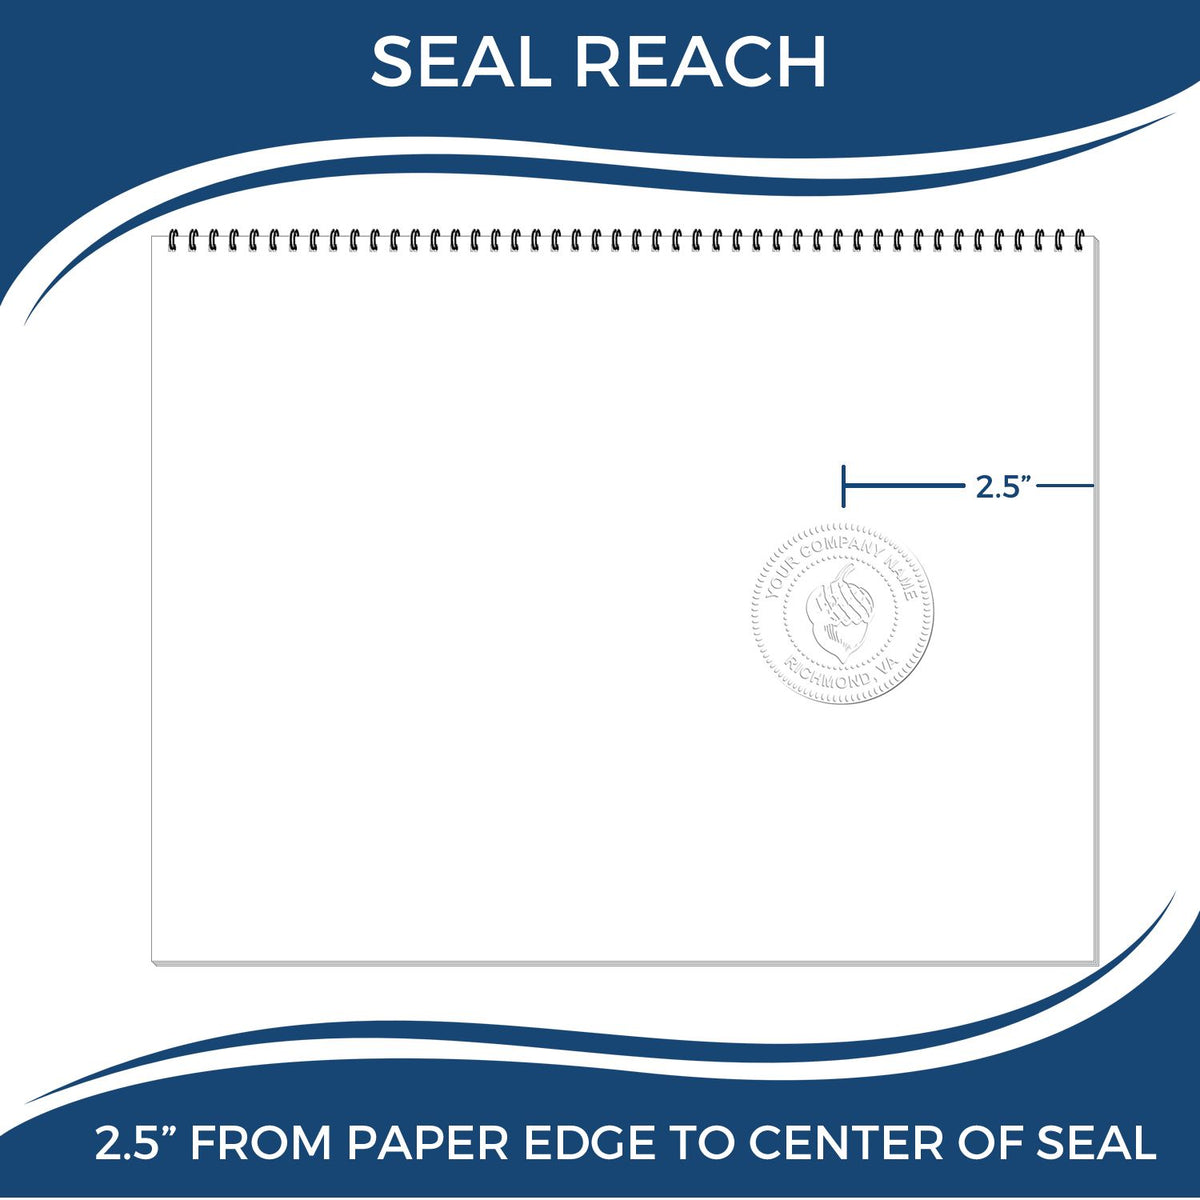 An infographic showing the seal reach which is represented by a ruler and a miniature seal image of the Long Reach Wyoming PE Seal